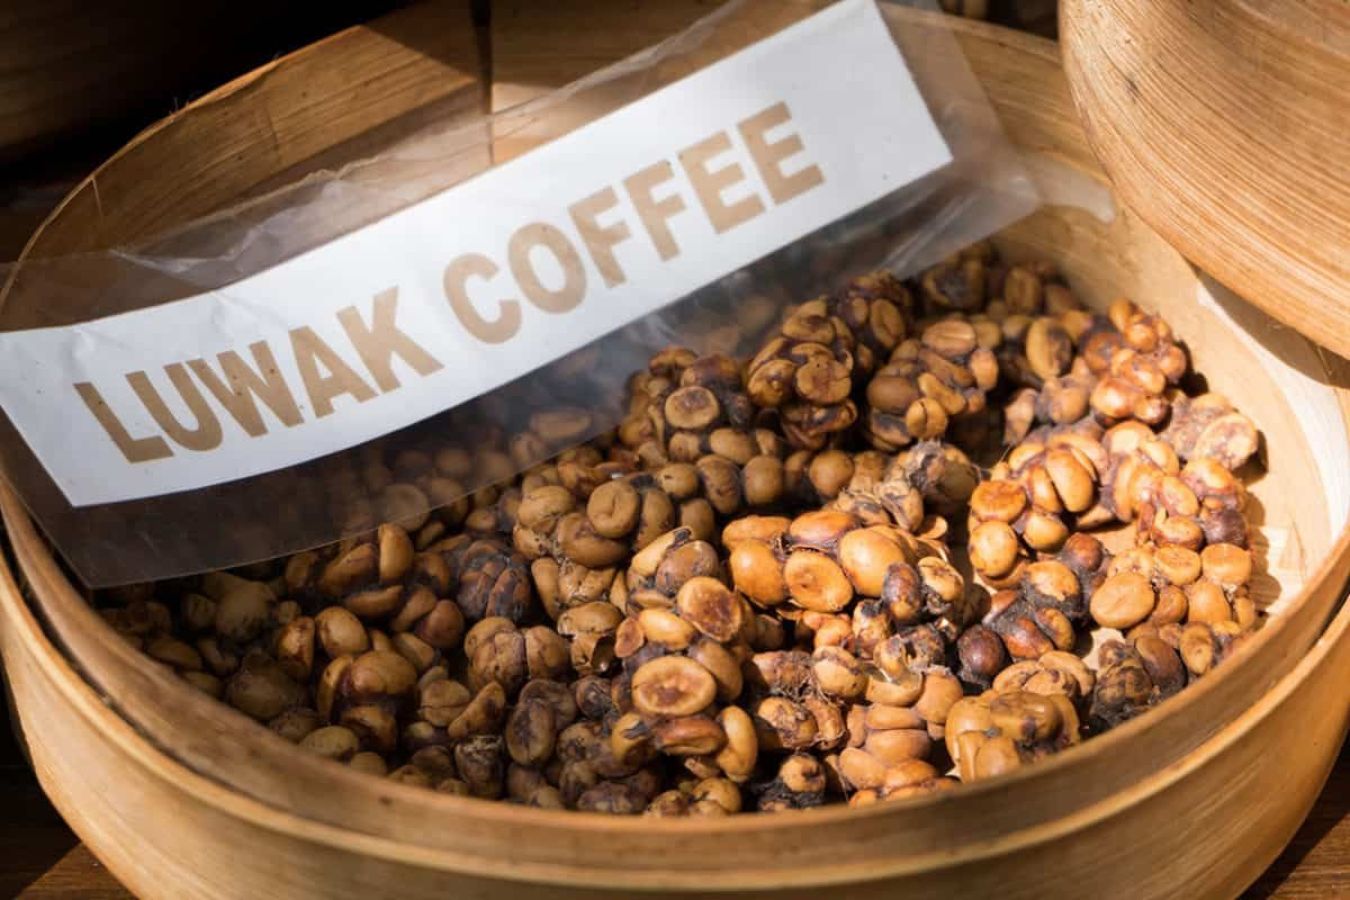 Why Is Mink Coffee So Expensive?